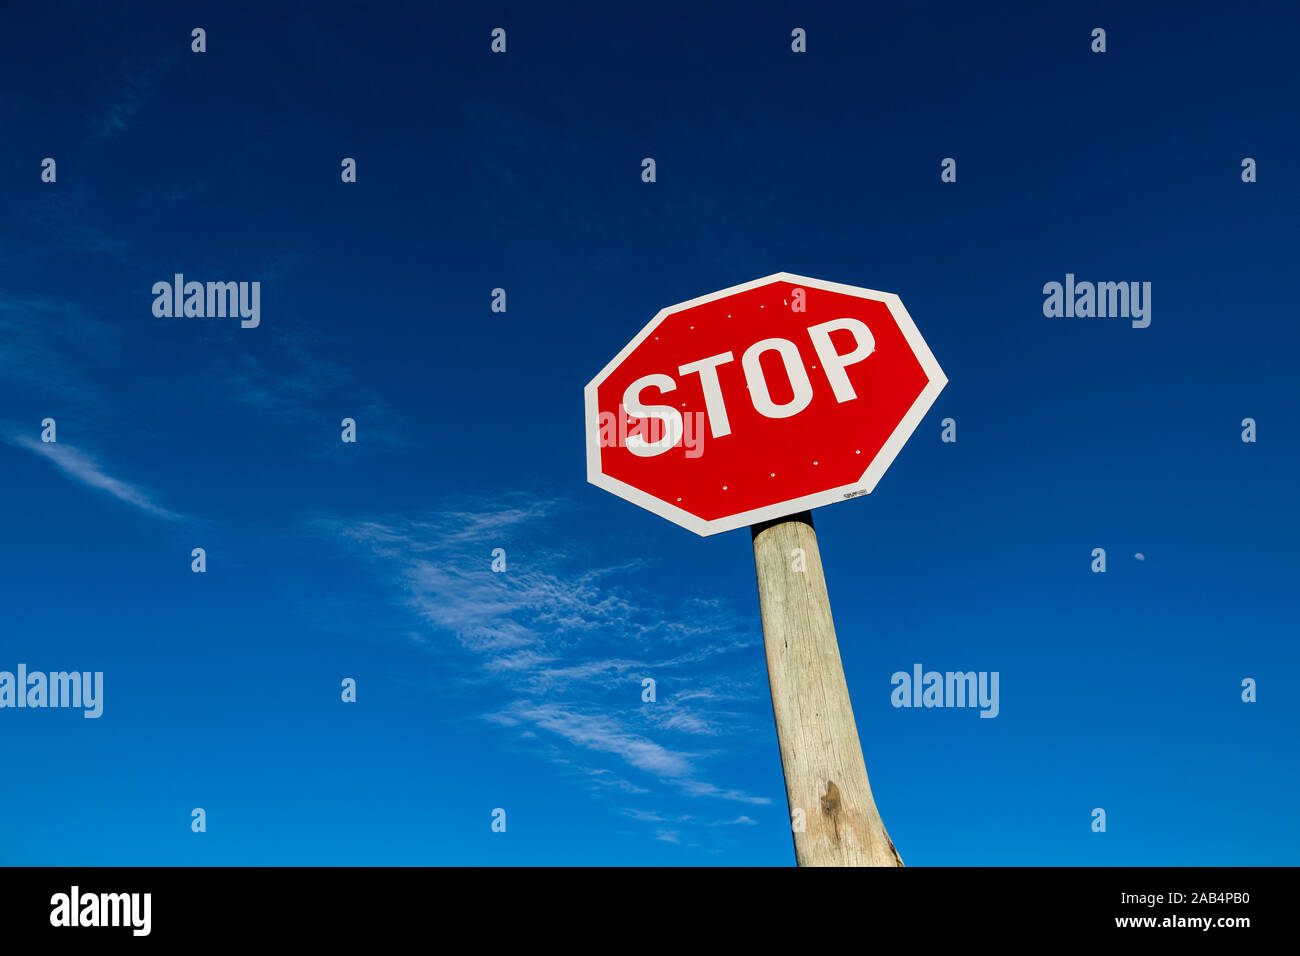 Stop sign in South Africa Stock Photo